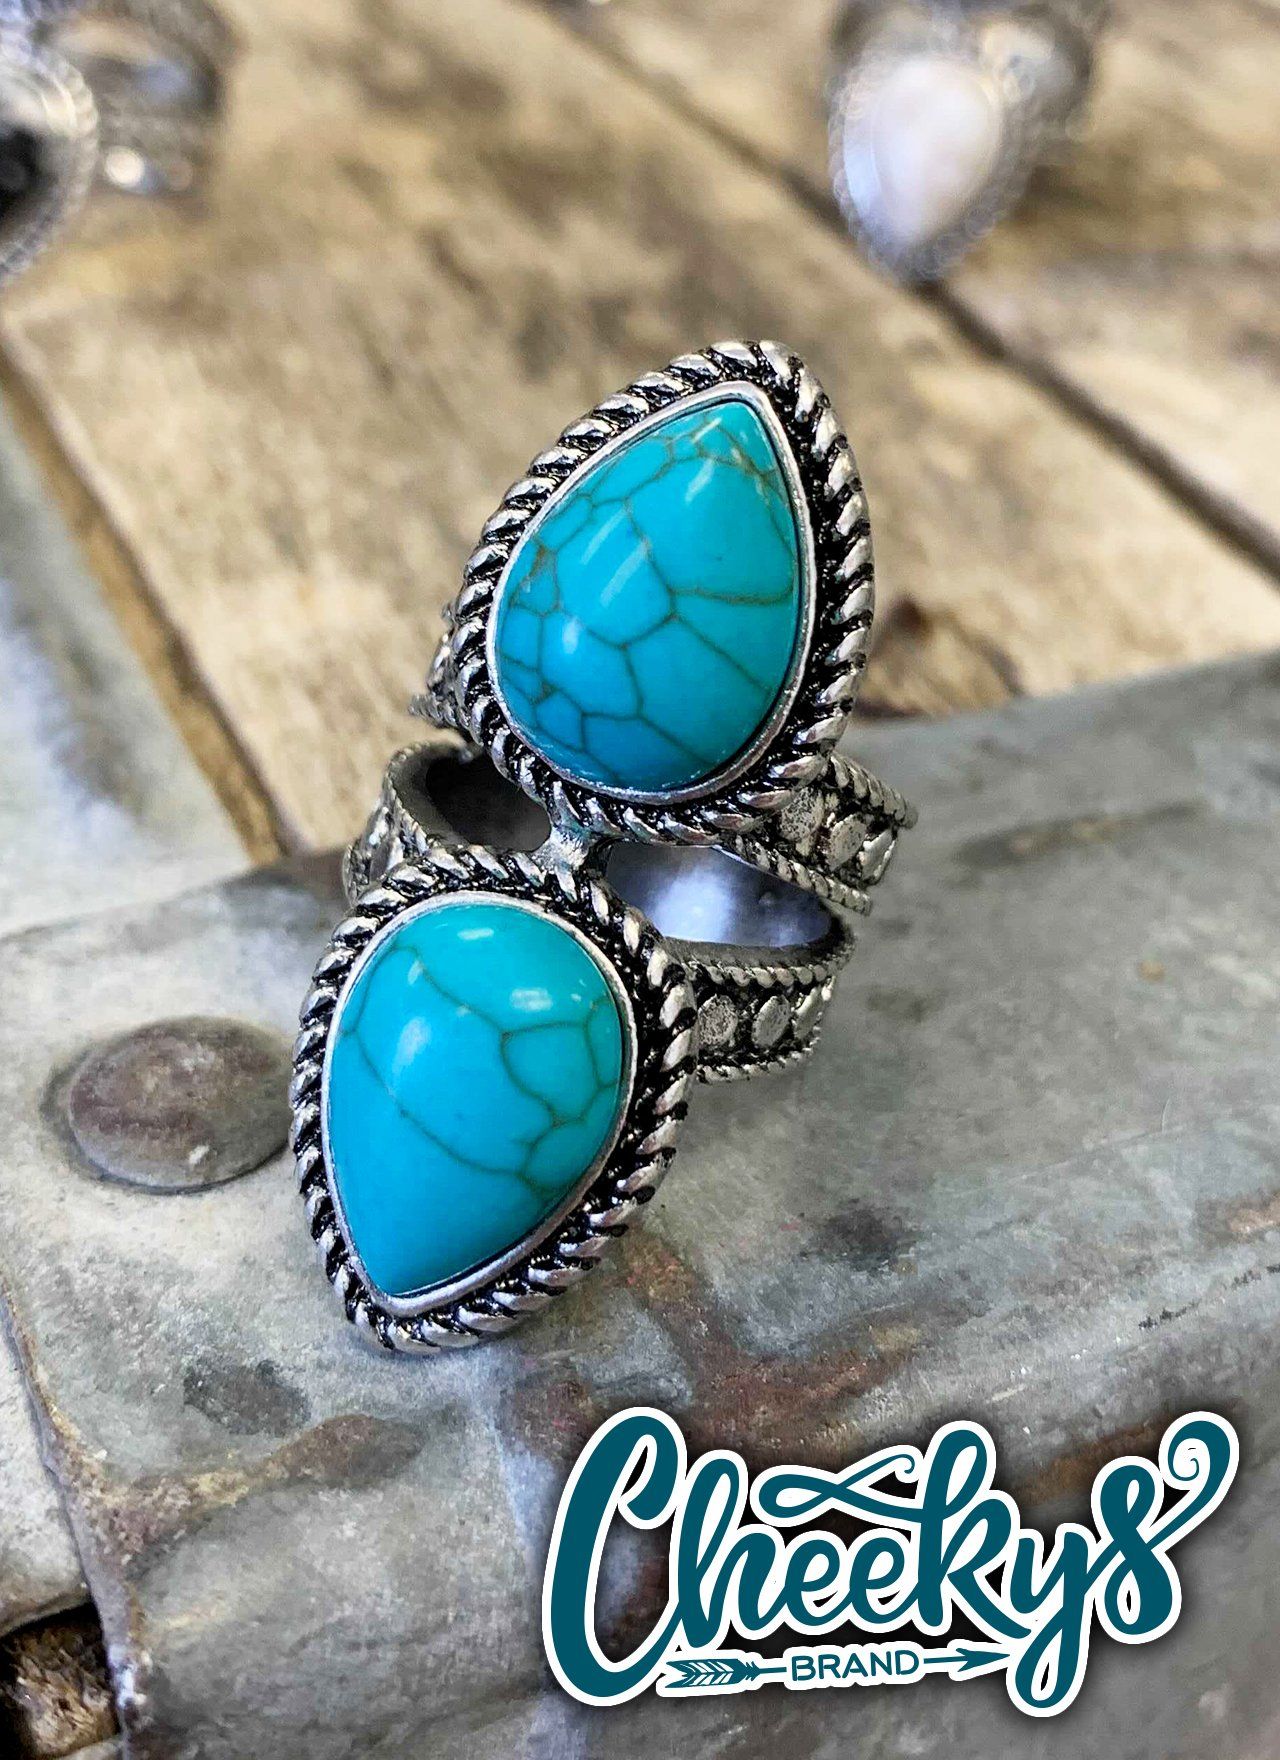 Callie Mirrored Teardrop Stone Ring in Turquoise Jewelry 18 